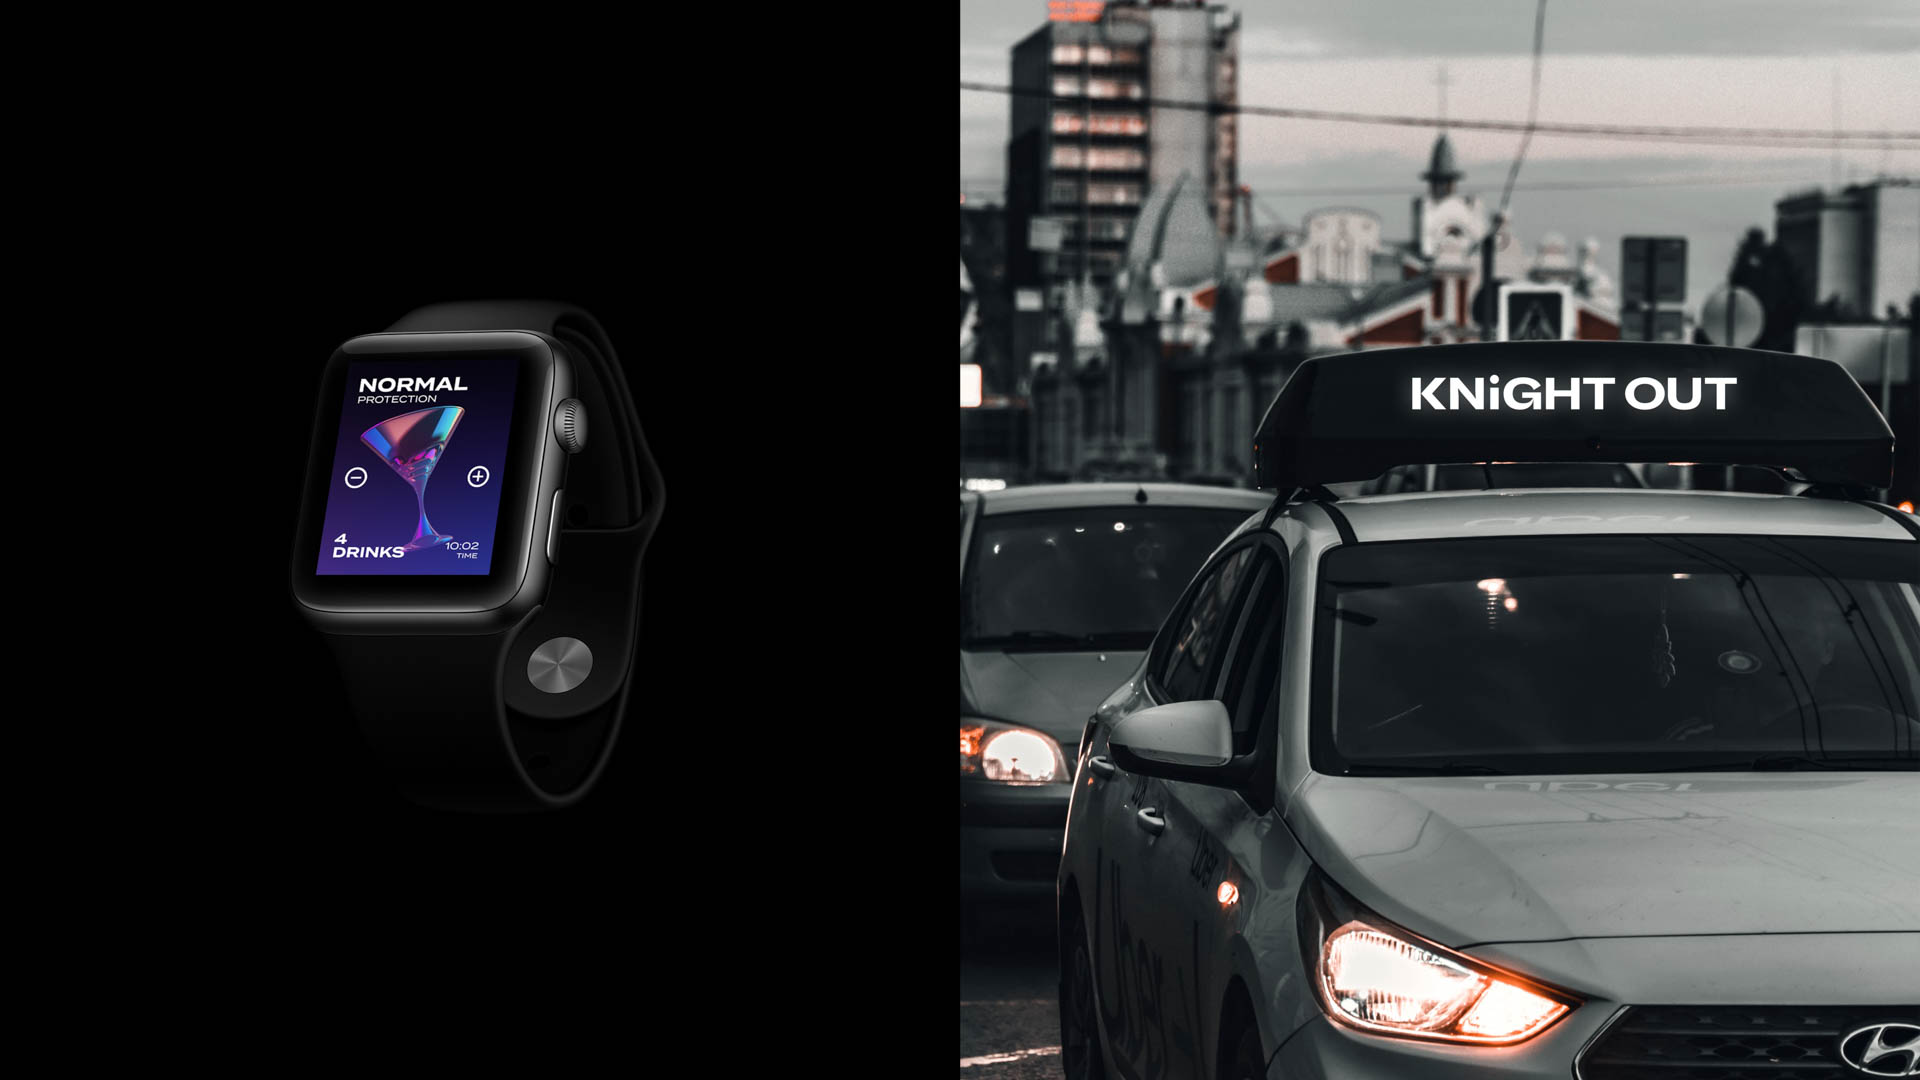 Knight Out branding on an apple watch and on a car